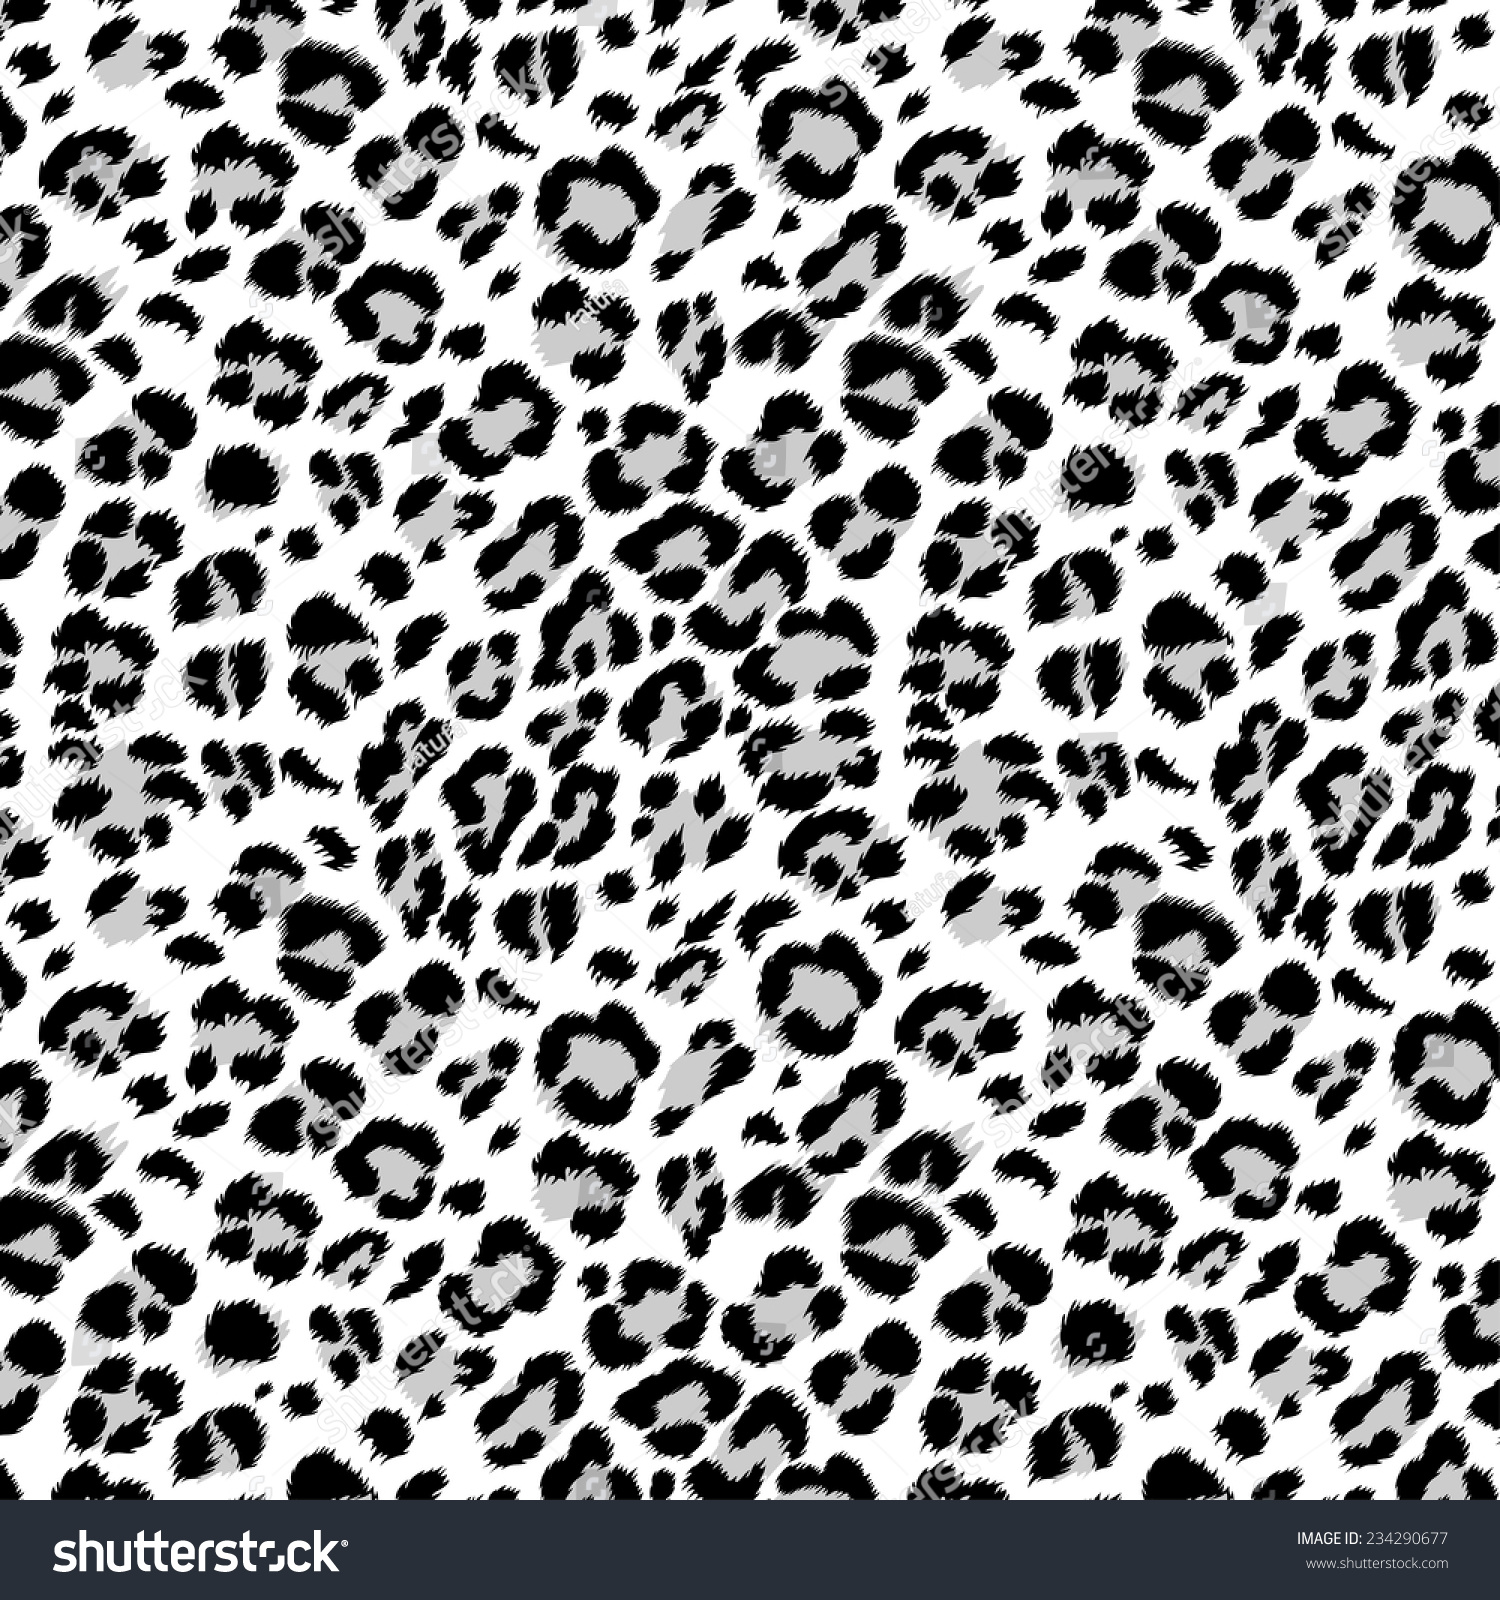 Seamless Black And White Color Leopard Pattern. Can Be Used For Fabrics ...